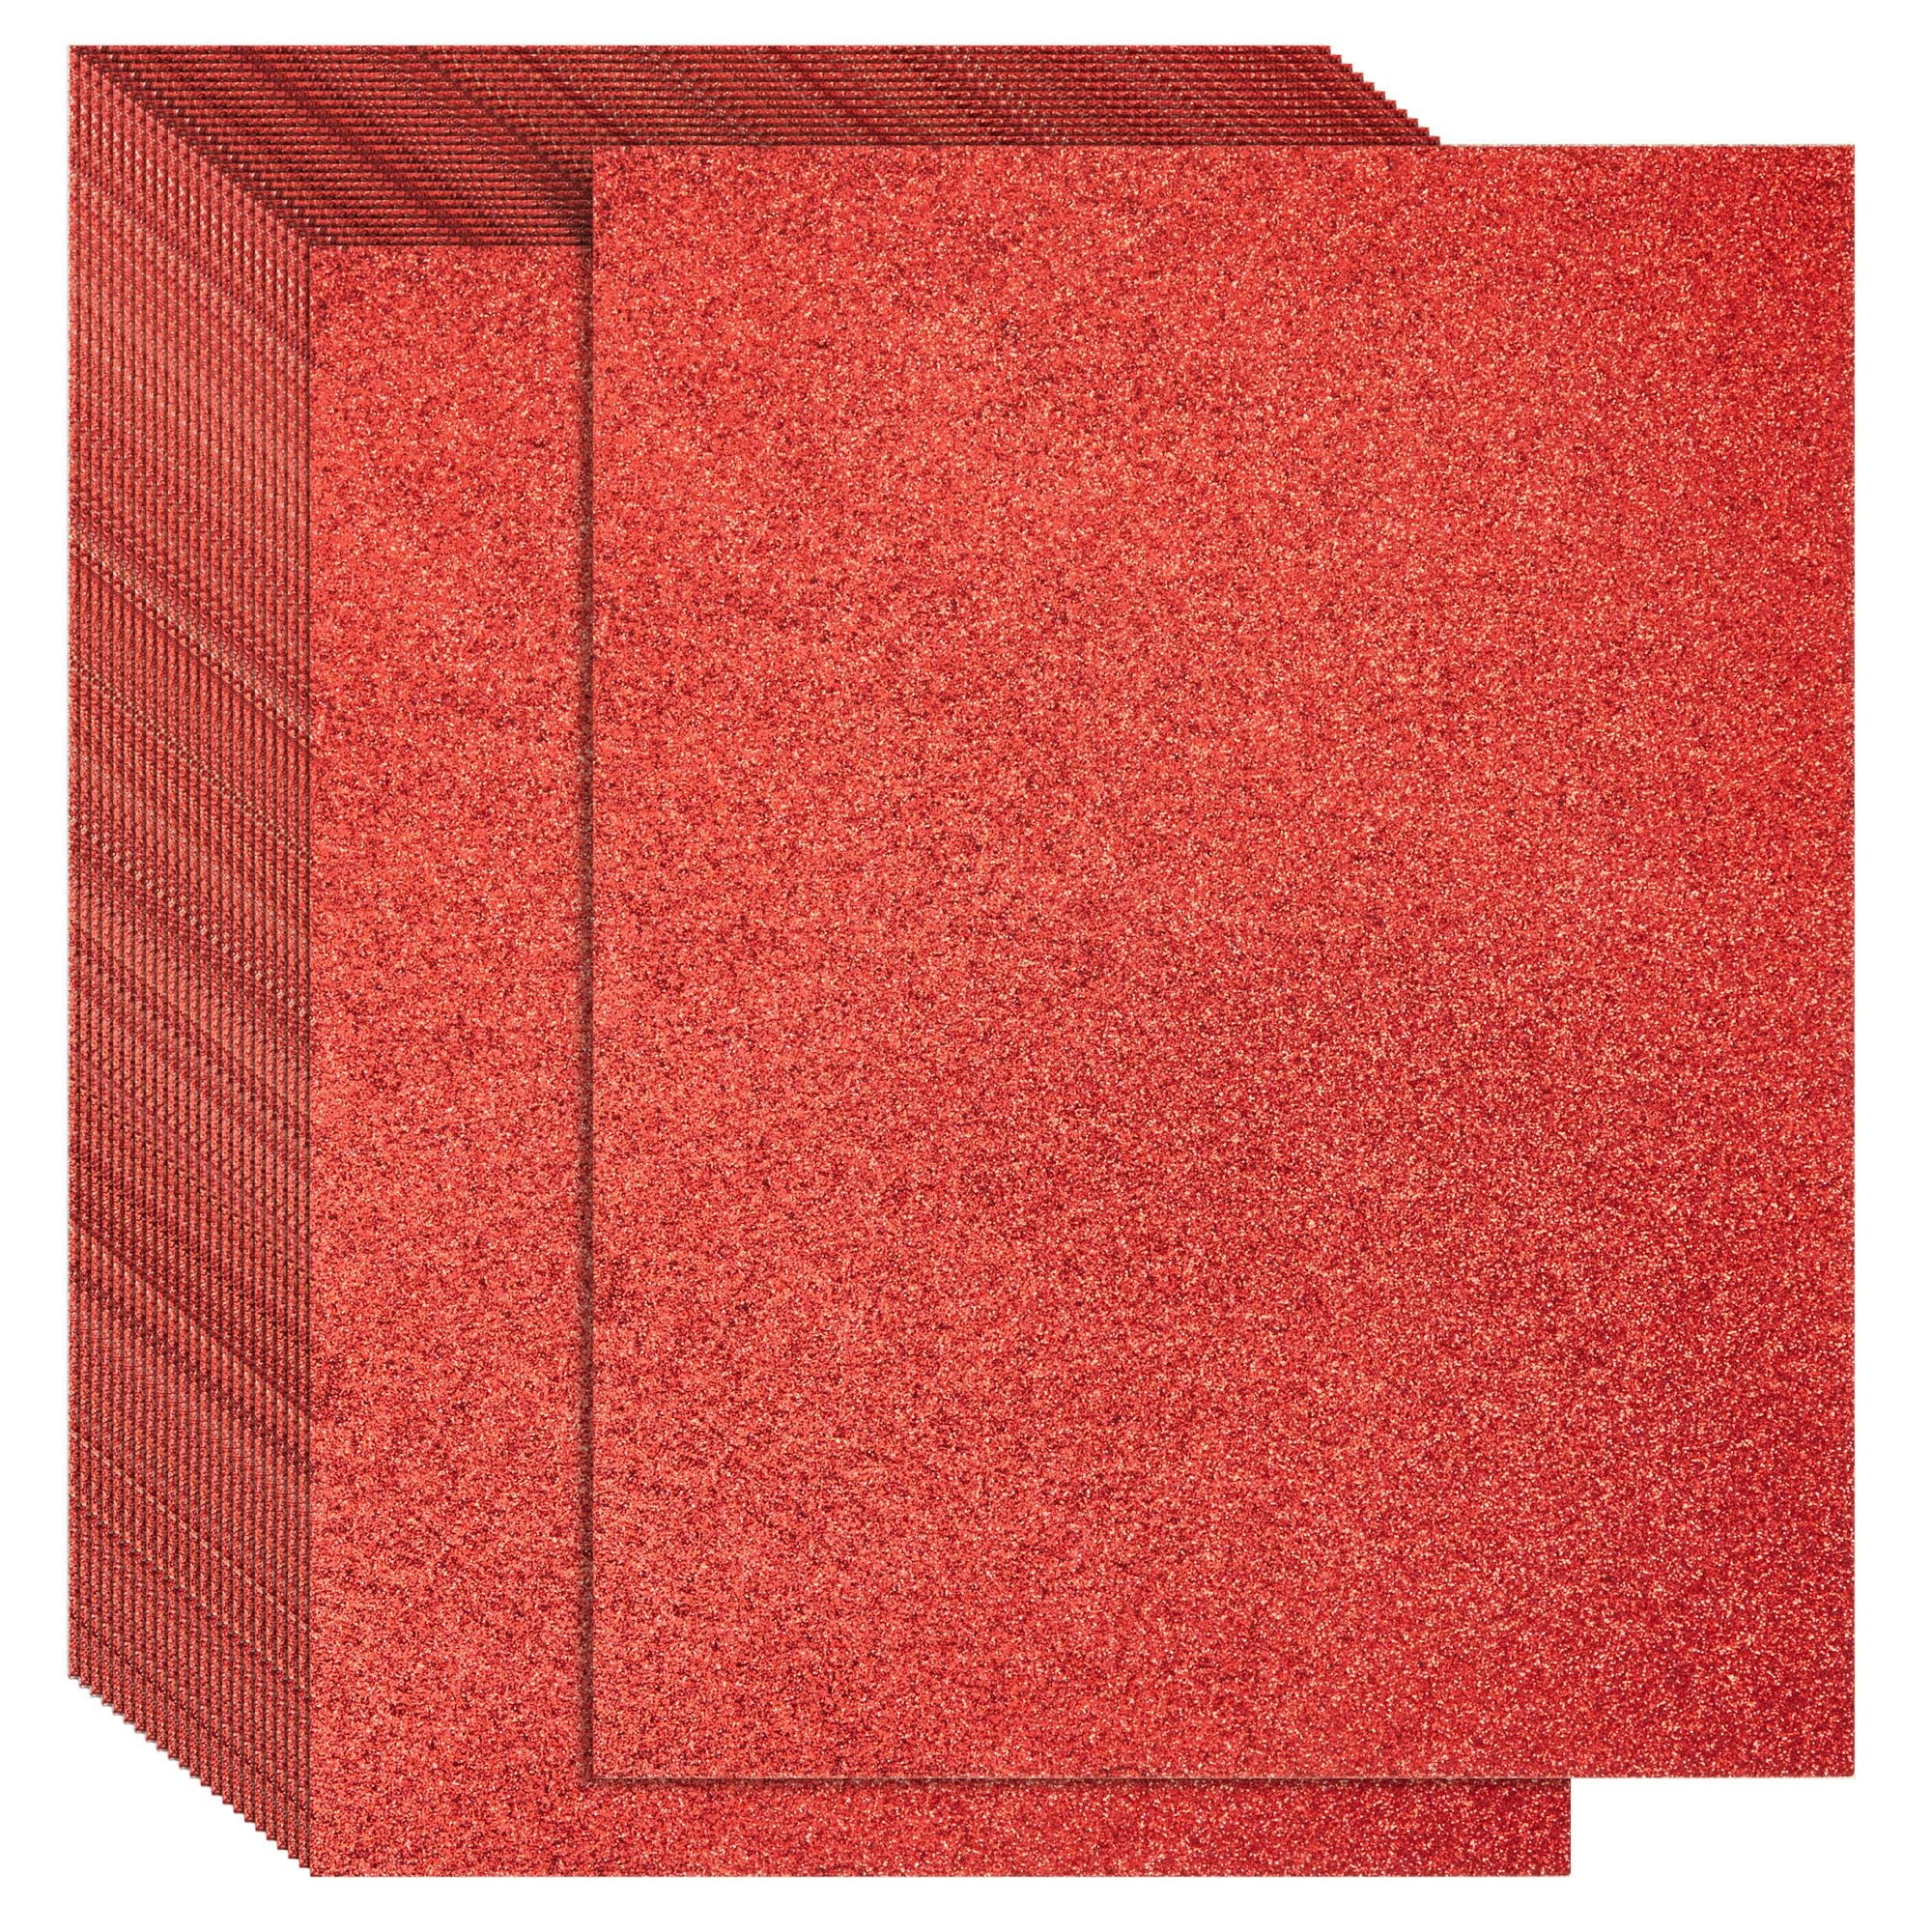 25 Sheets Red Glitter Cardstock - 110lb. 300 GSM - 8.2 x 11.7 Inch